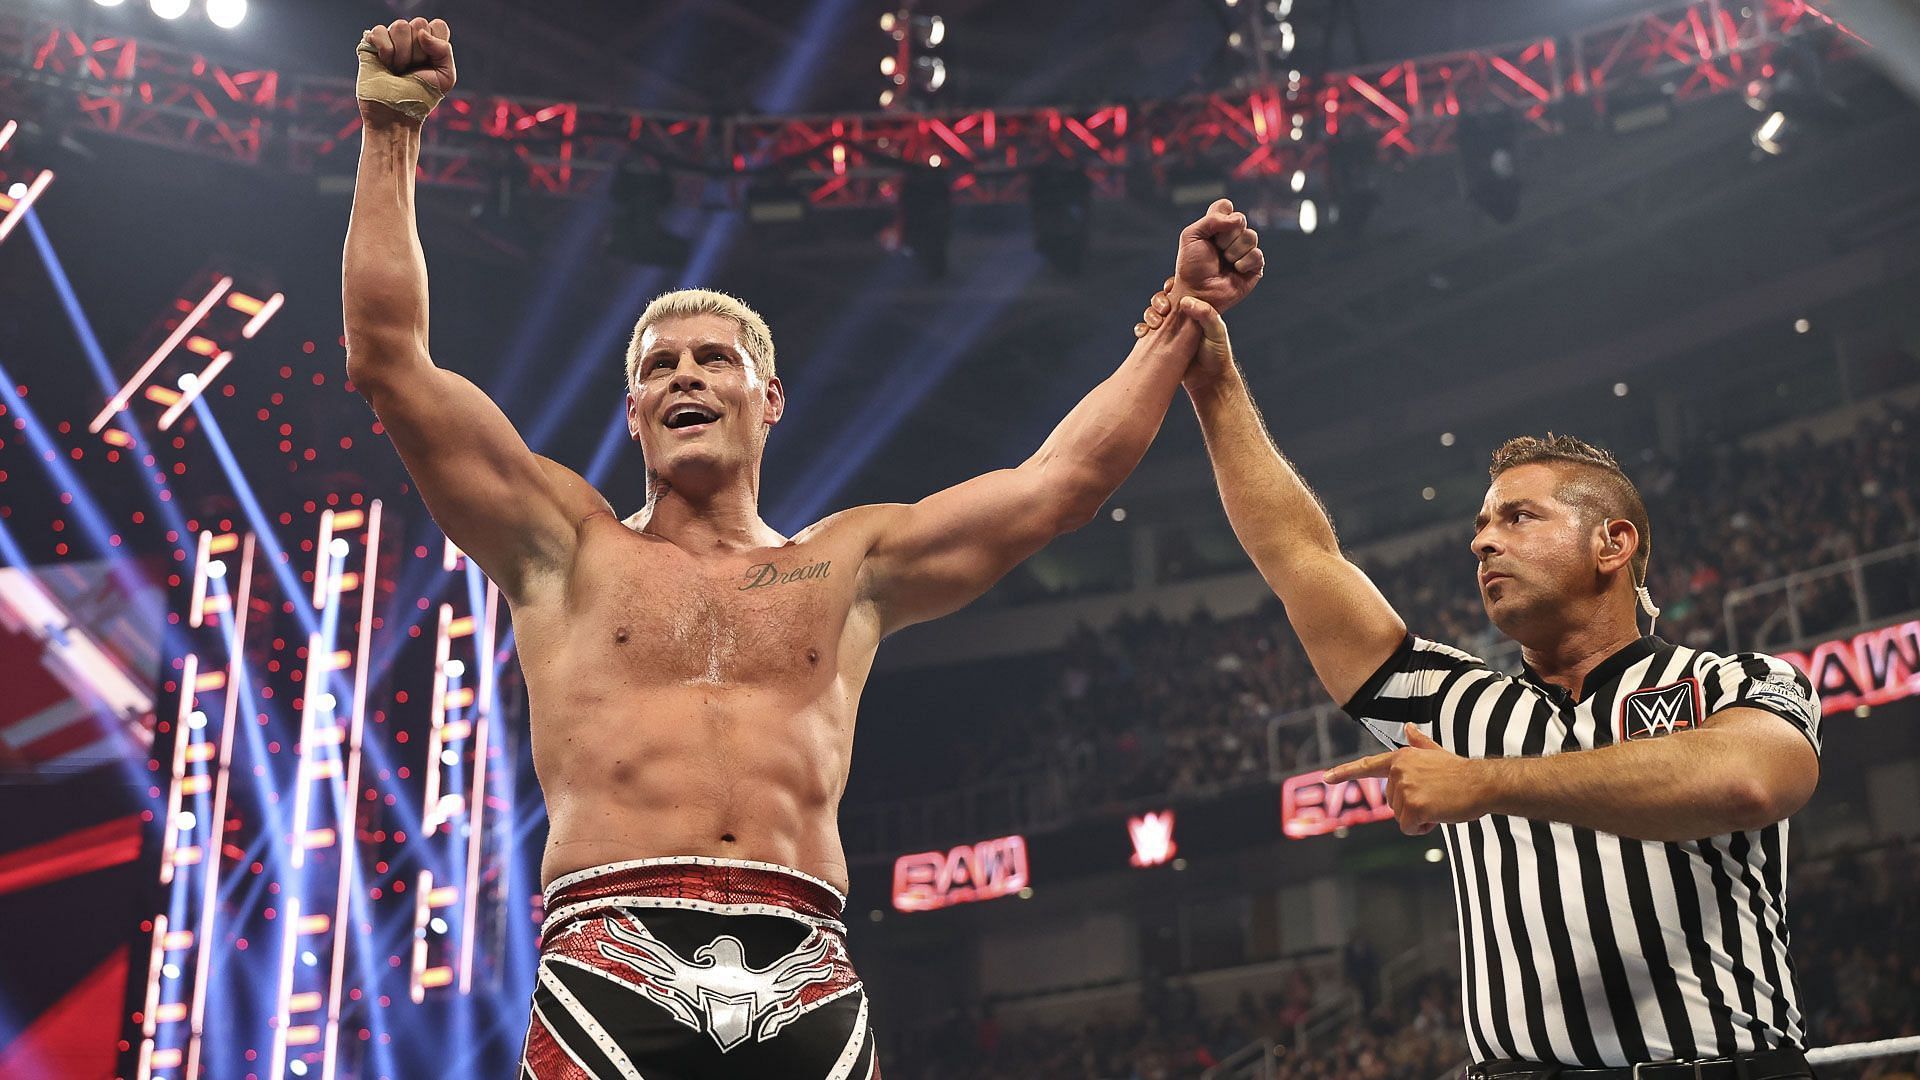 Cody Rhodes celebrates a win over Grayson Waller on WWE RAW